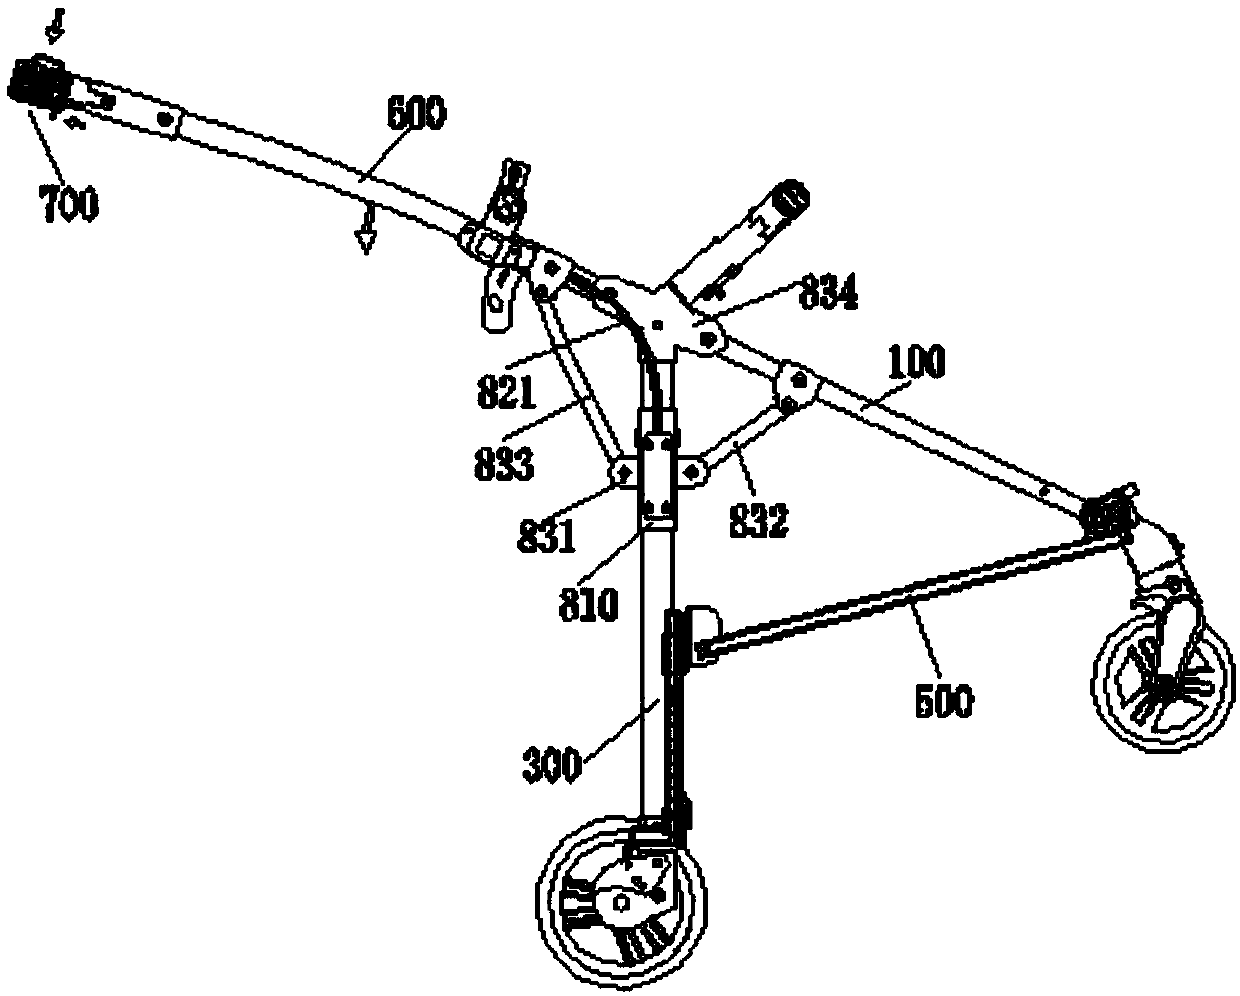 Wheel bracket folding mechanism for baby carriage and vehicle frame